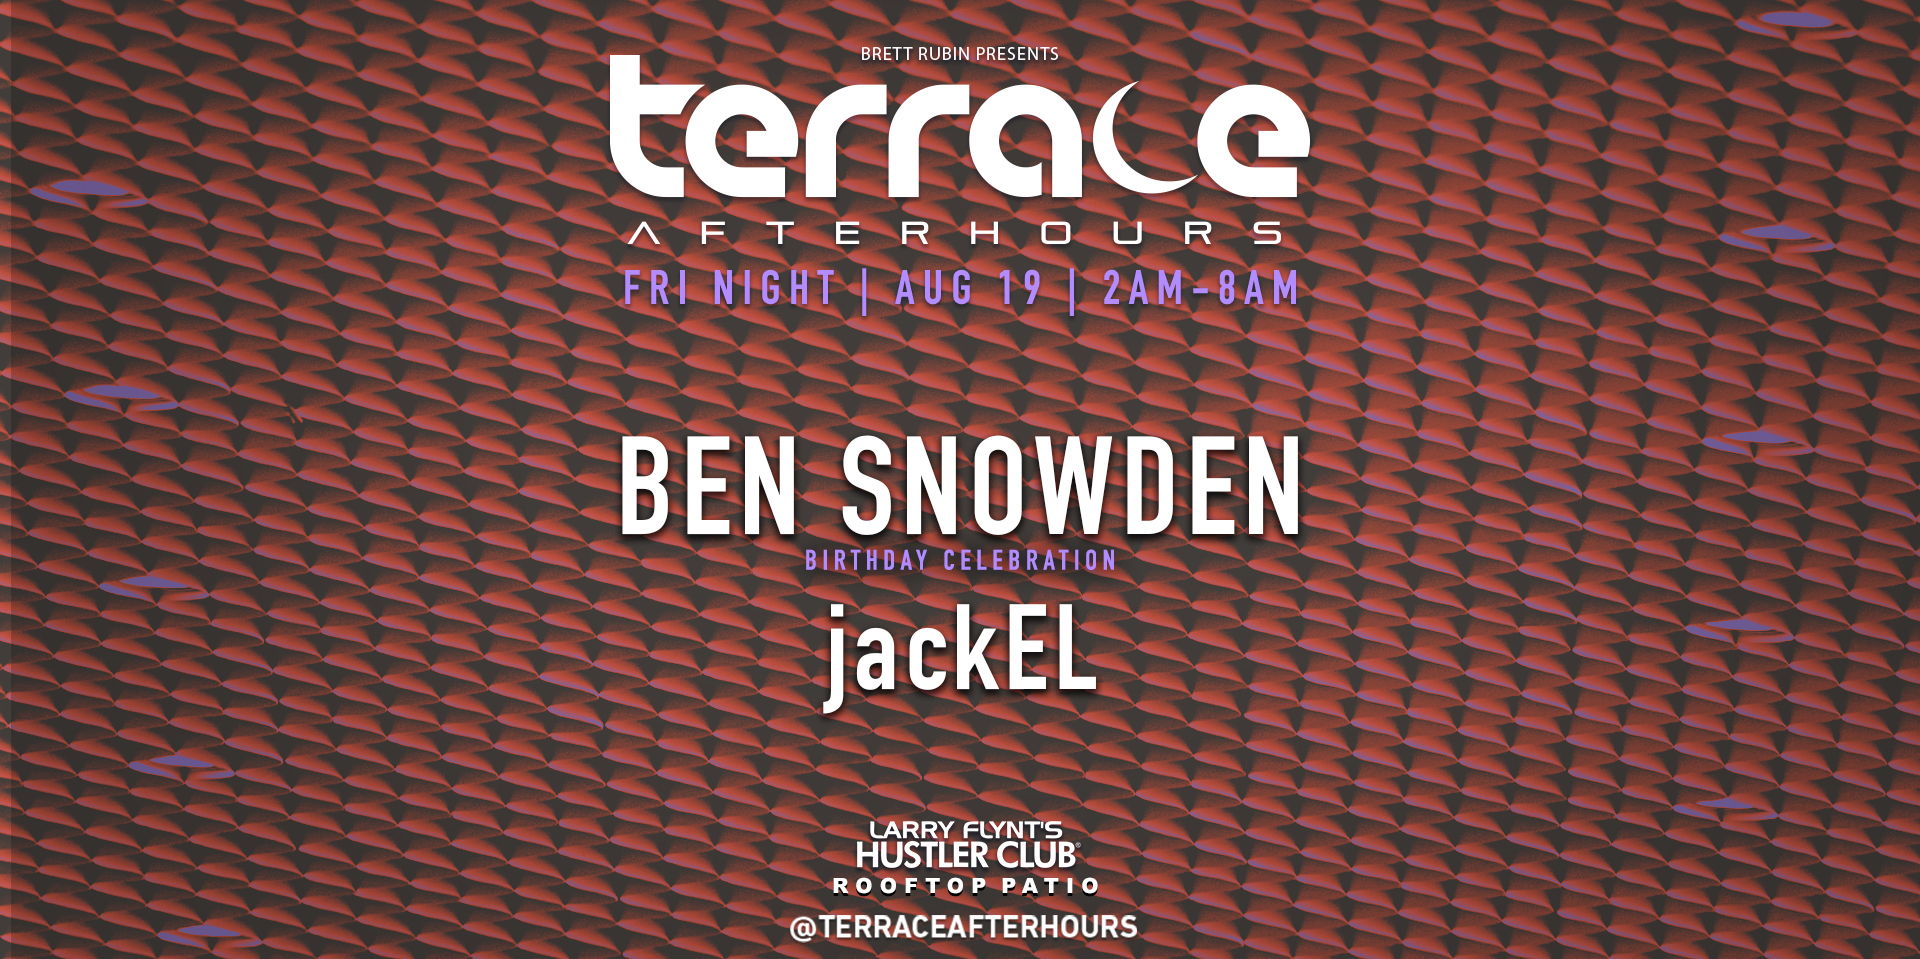 Ben Snowden at Terrace Afterhours promotional image